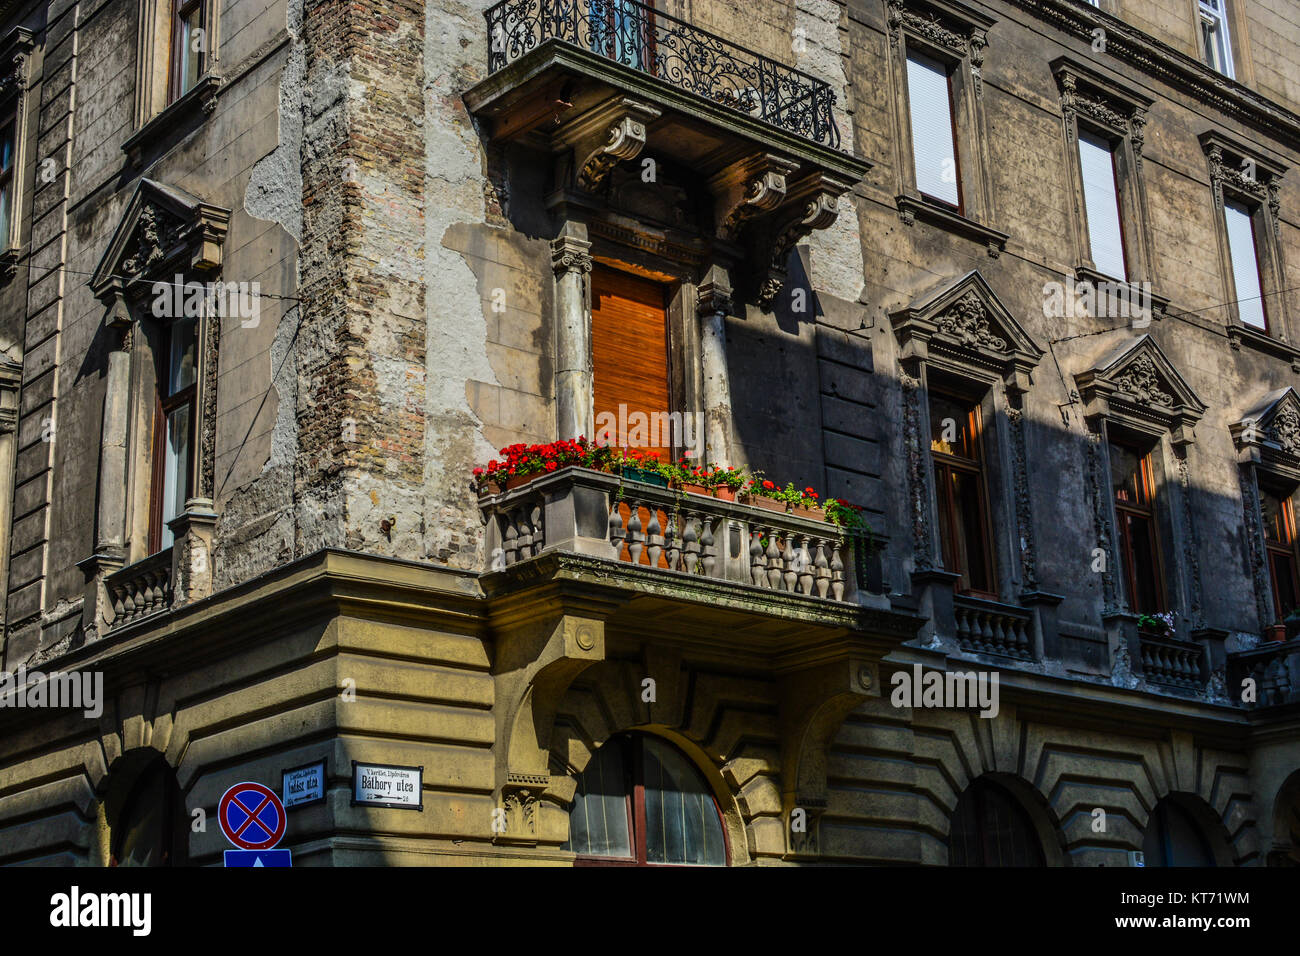 An old apartment building on Bathory Utca in the Parliament area of Budapest Hungary with crumbling walls and red flowers on the balcony Stock Photo